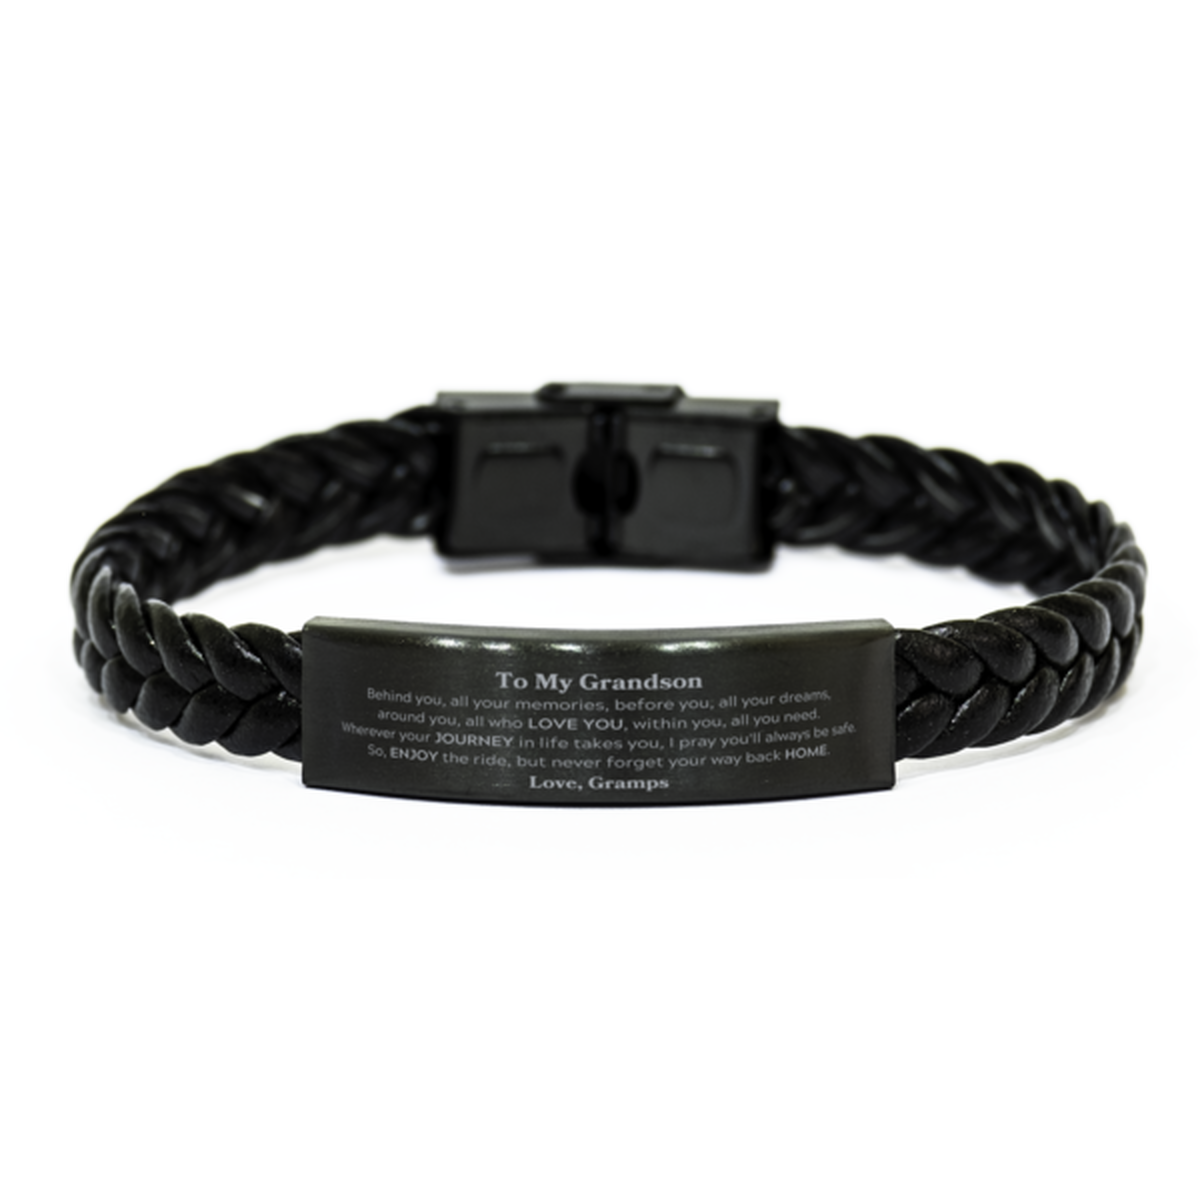 To My Grandson Graduation Gifts from Gramps, Grandson Braided Leather Bracelet Christmas Birthday Gifts for Grandson Behind you, all your memories, before you, all your dreams. Love, Gramps